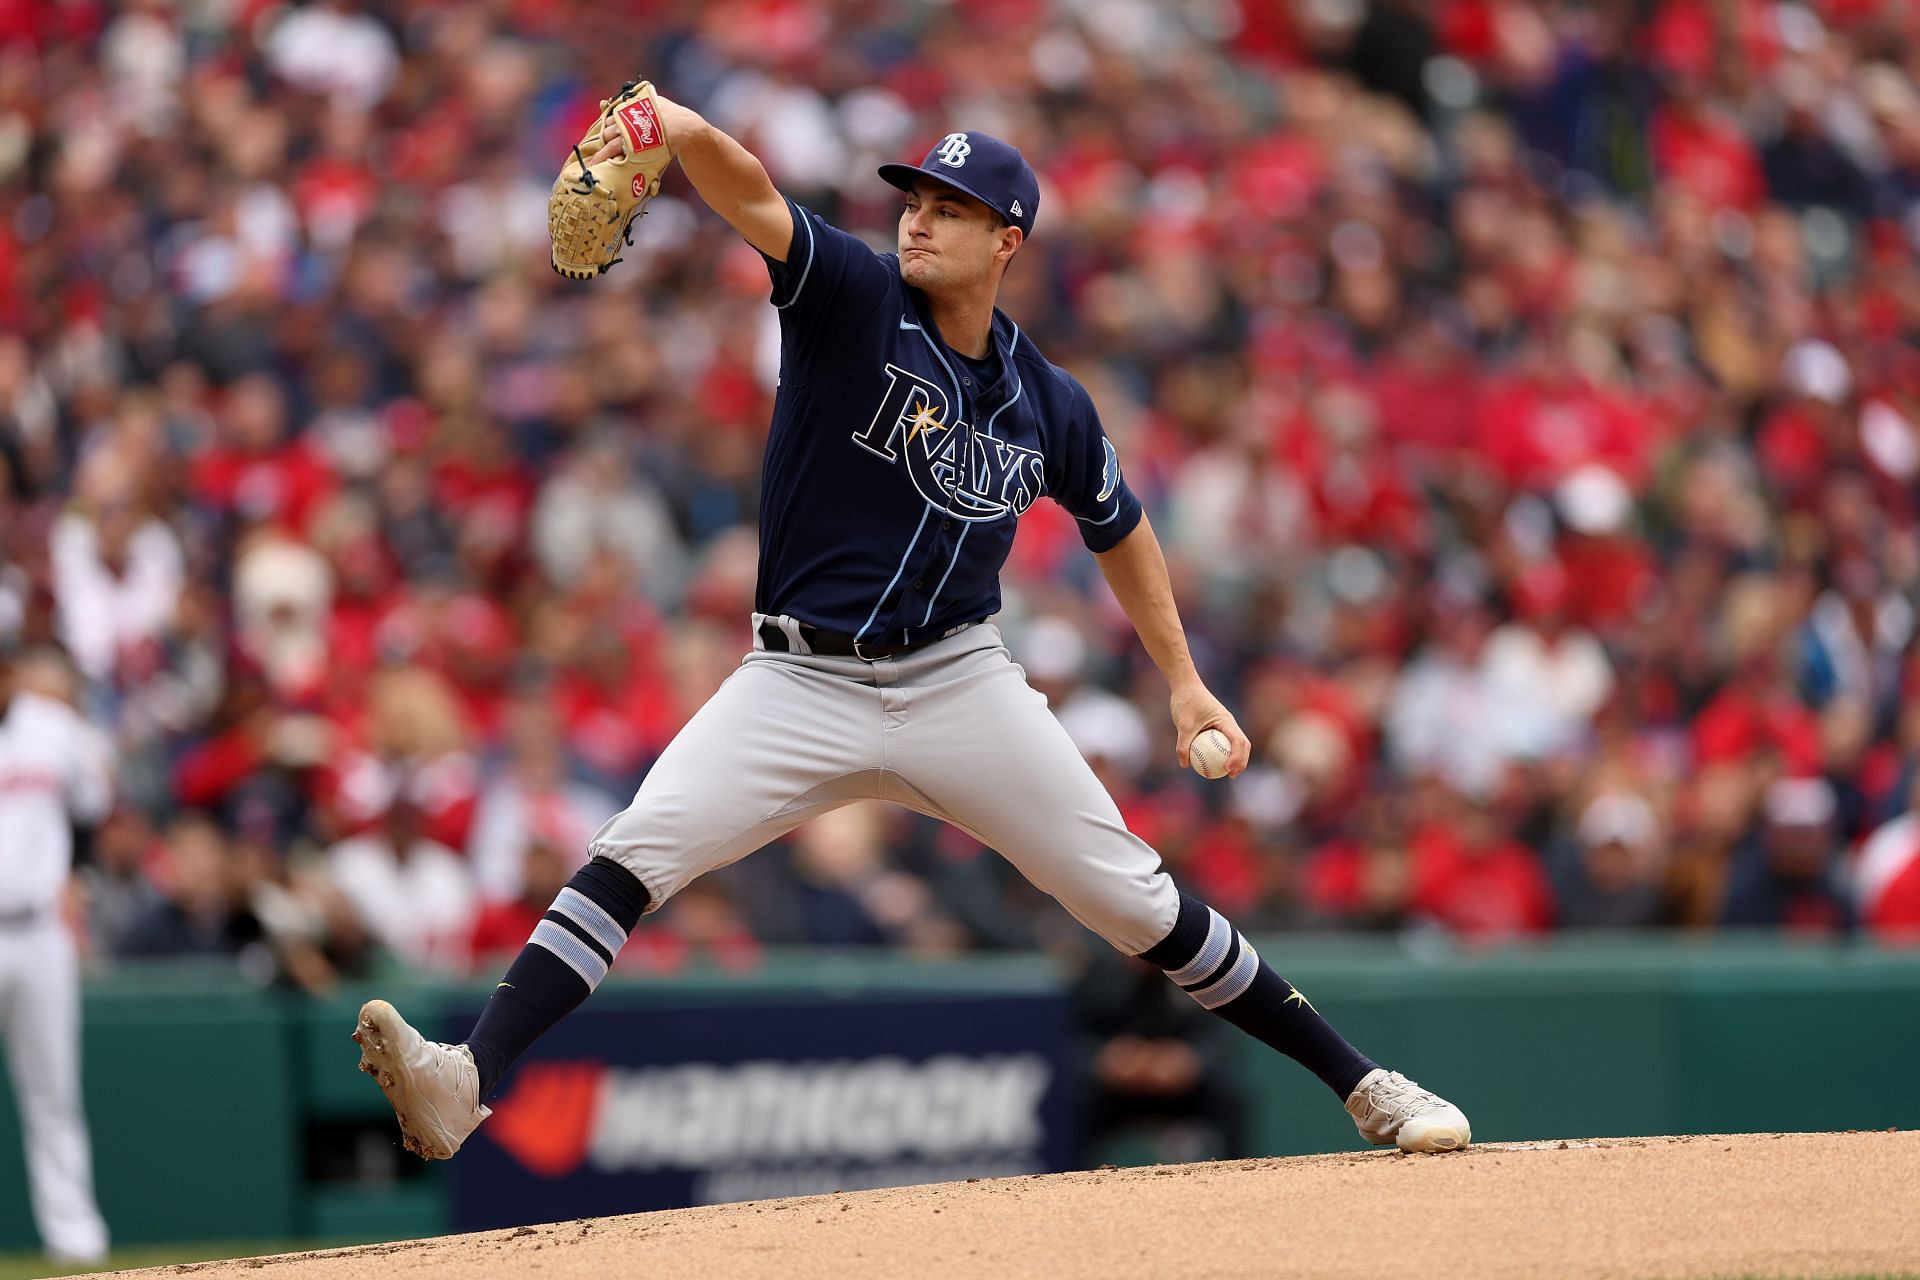 Tampa Bay Rays analyst proclaims Shane McClanahan as best pitcher